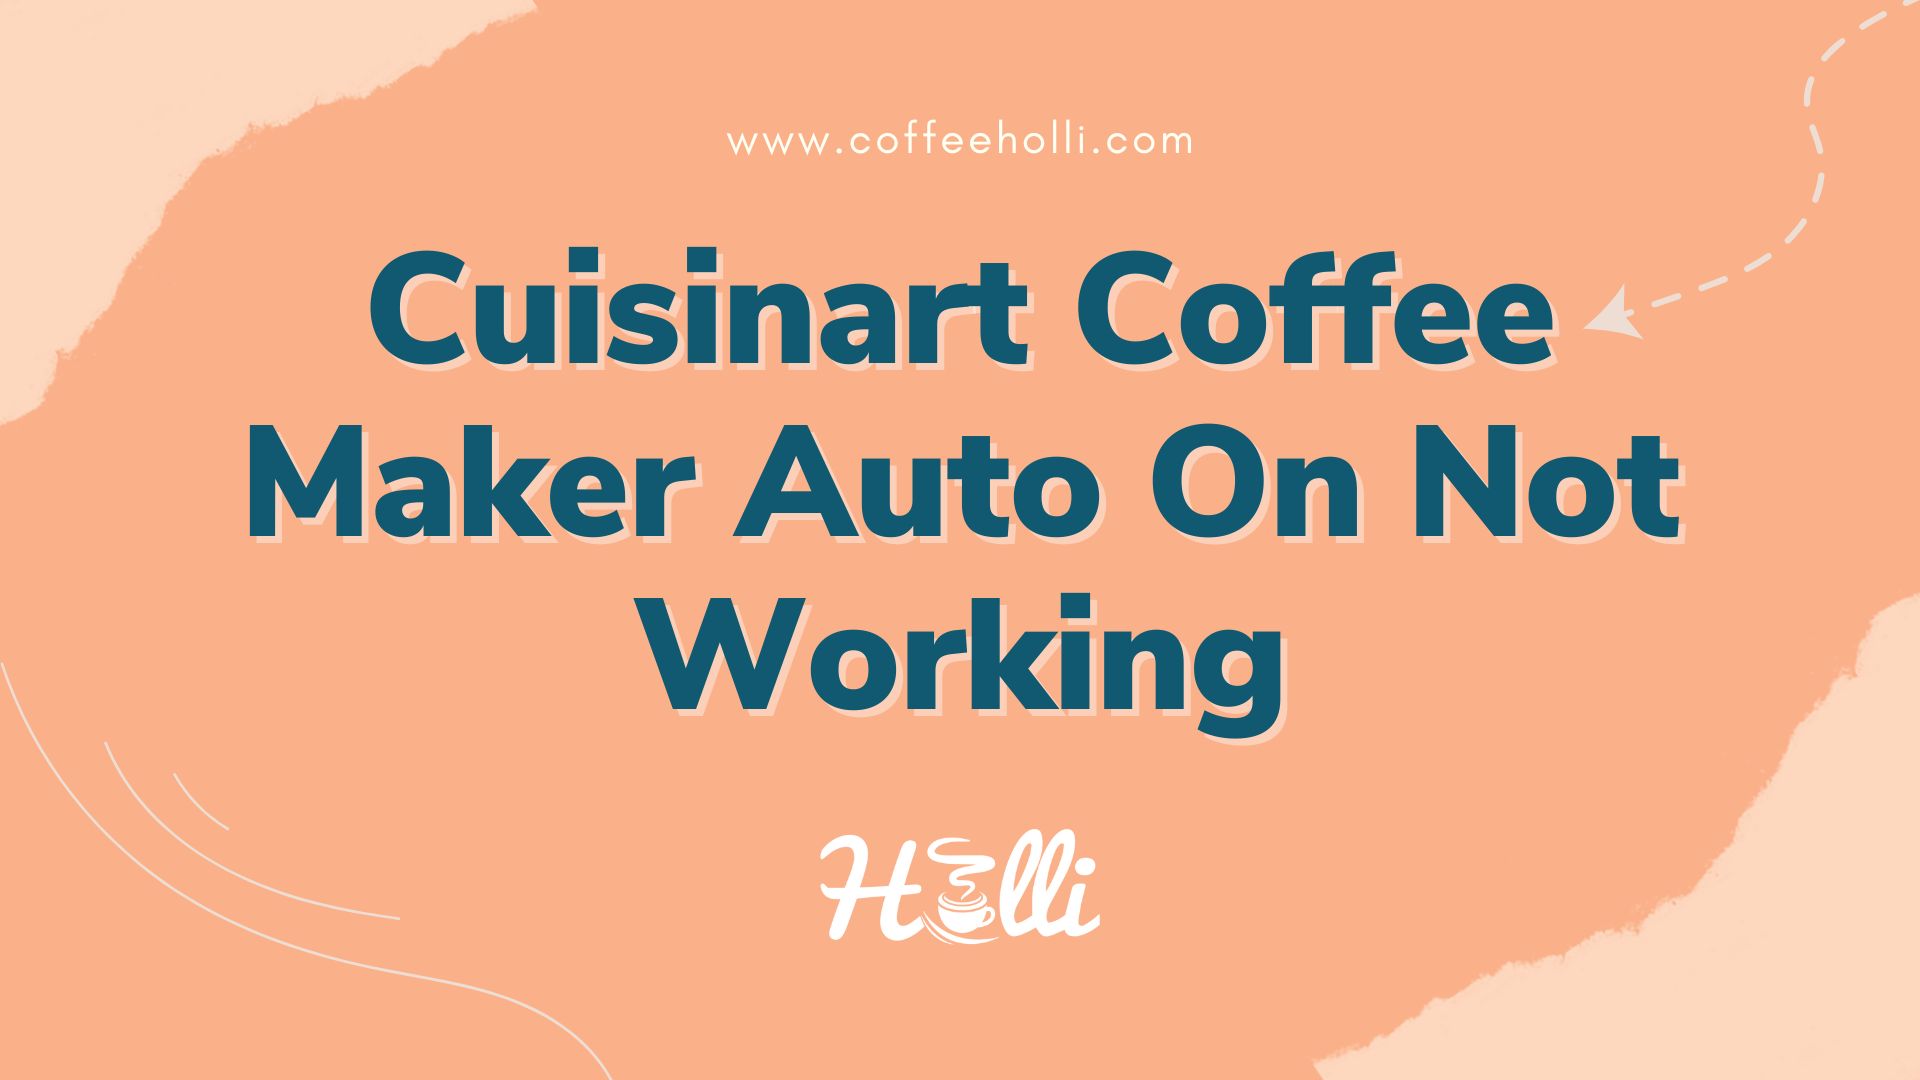 Cuisinart Coffee Maker Auto On Not Working